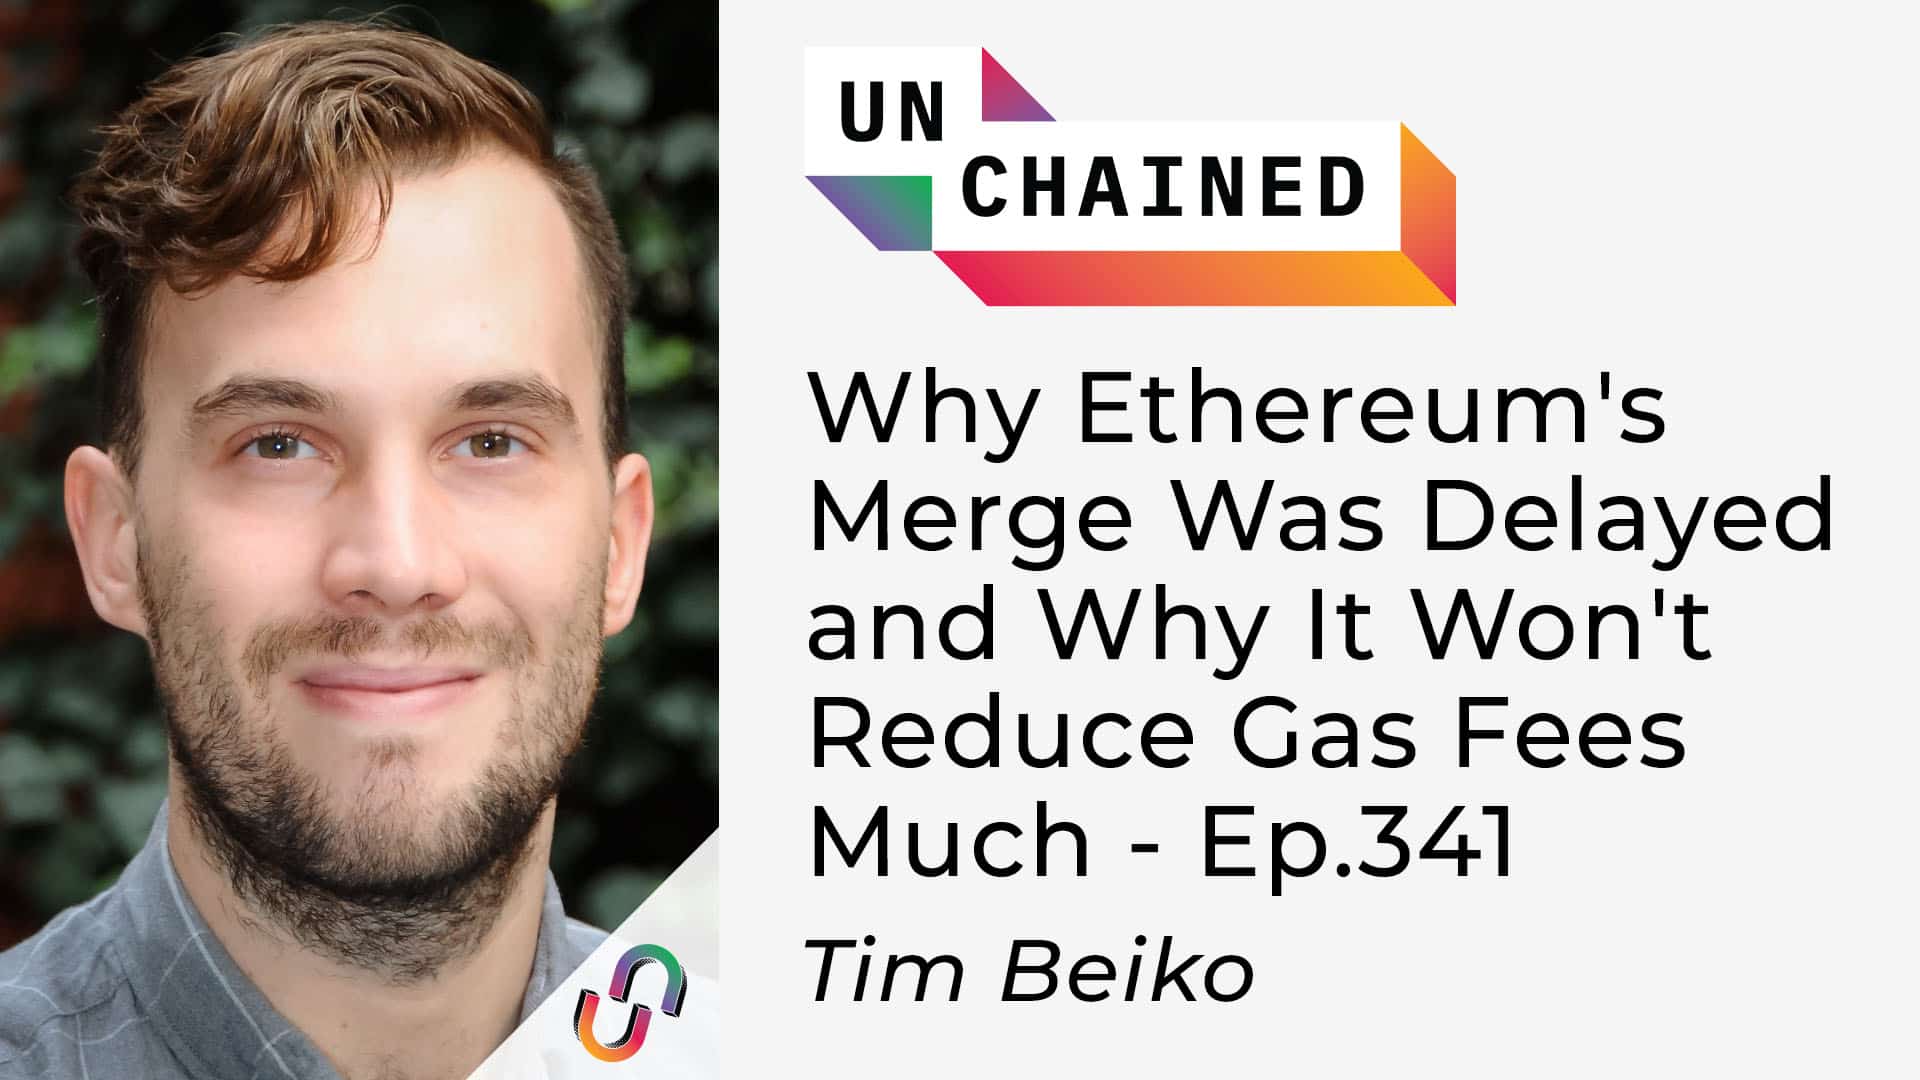 Unchained - Ep.341 - Why Ethereum's Merge Was Delayed and Why It Won't Reduce Gas Fees Much